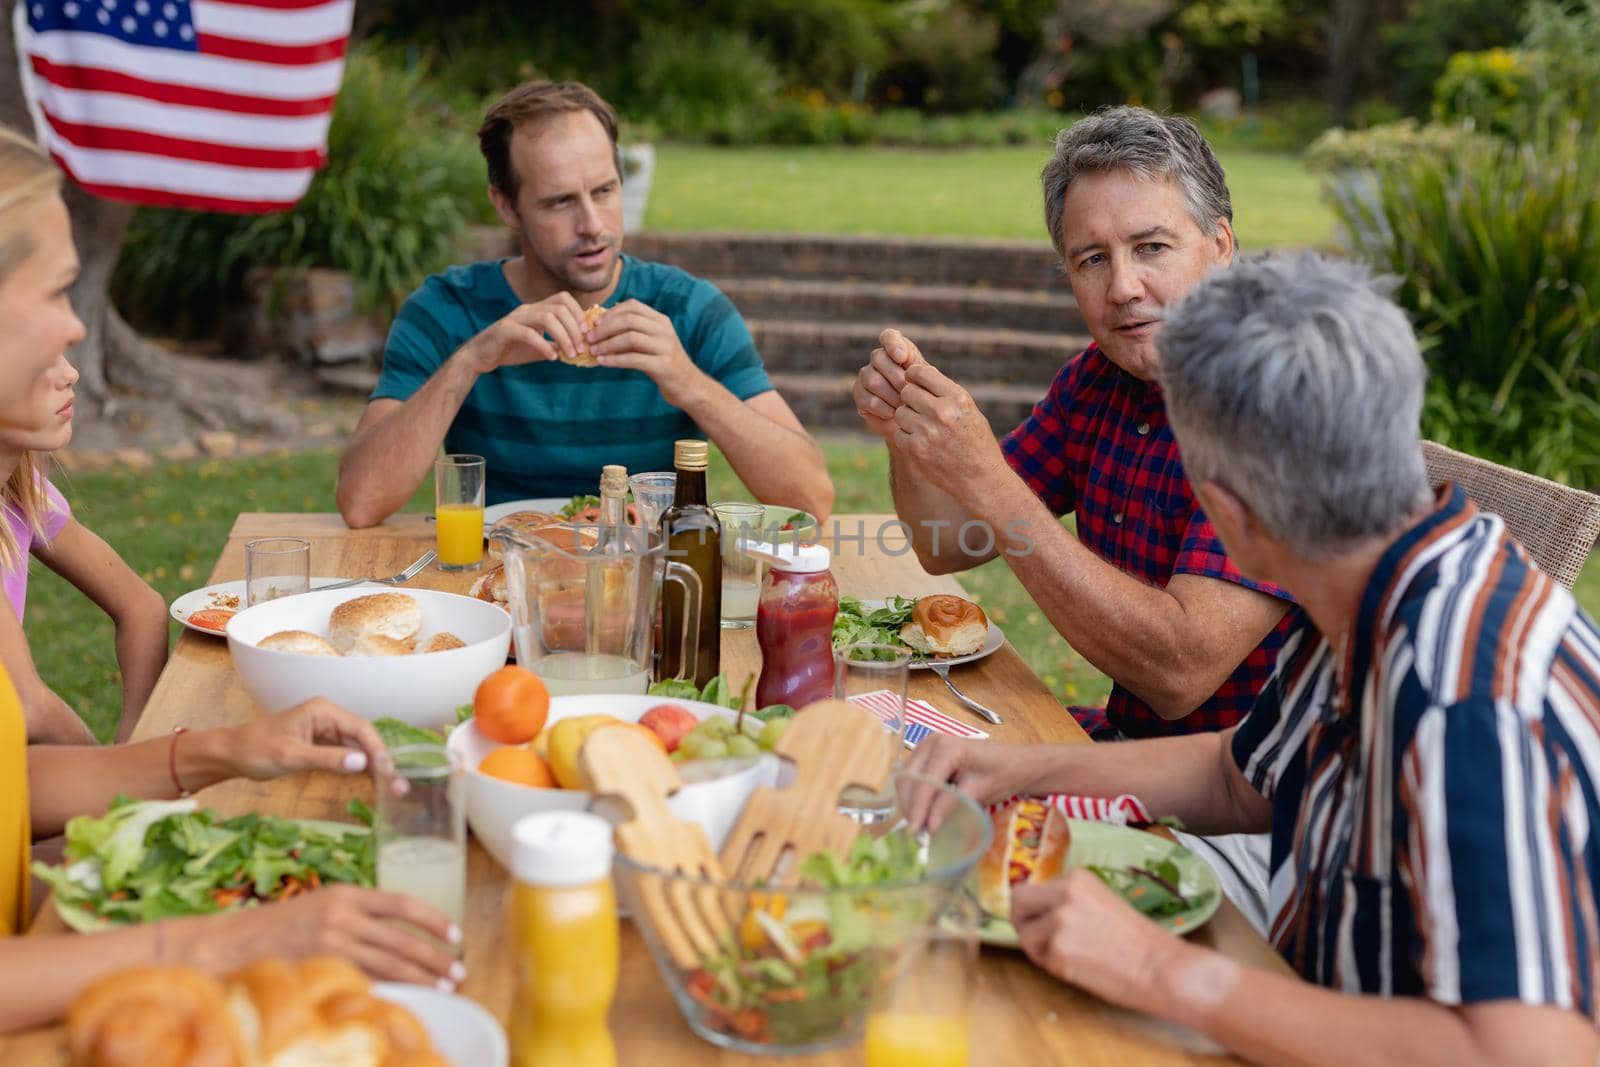 Caucasian senior man sitting at table talking with family having celebration meal in garden. three generation family celebrating independence day eating outdoors together.